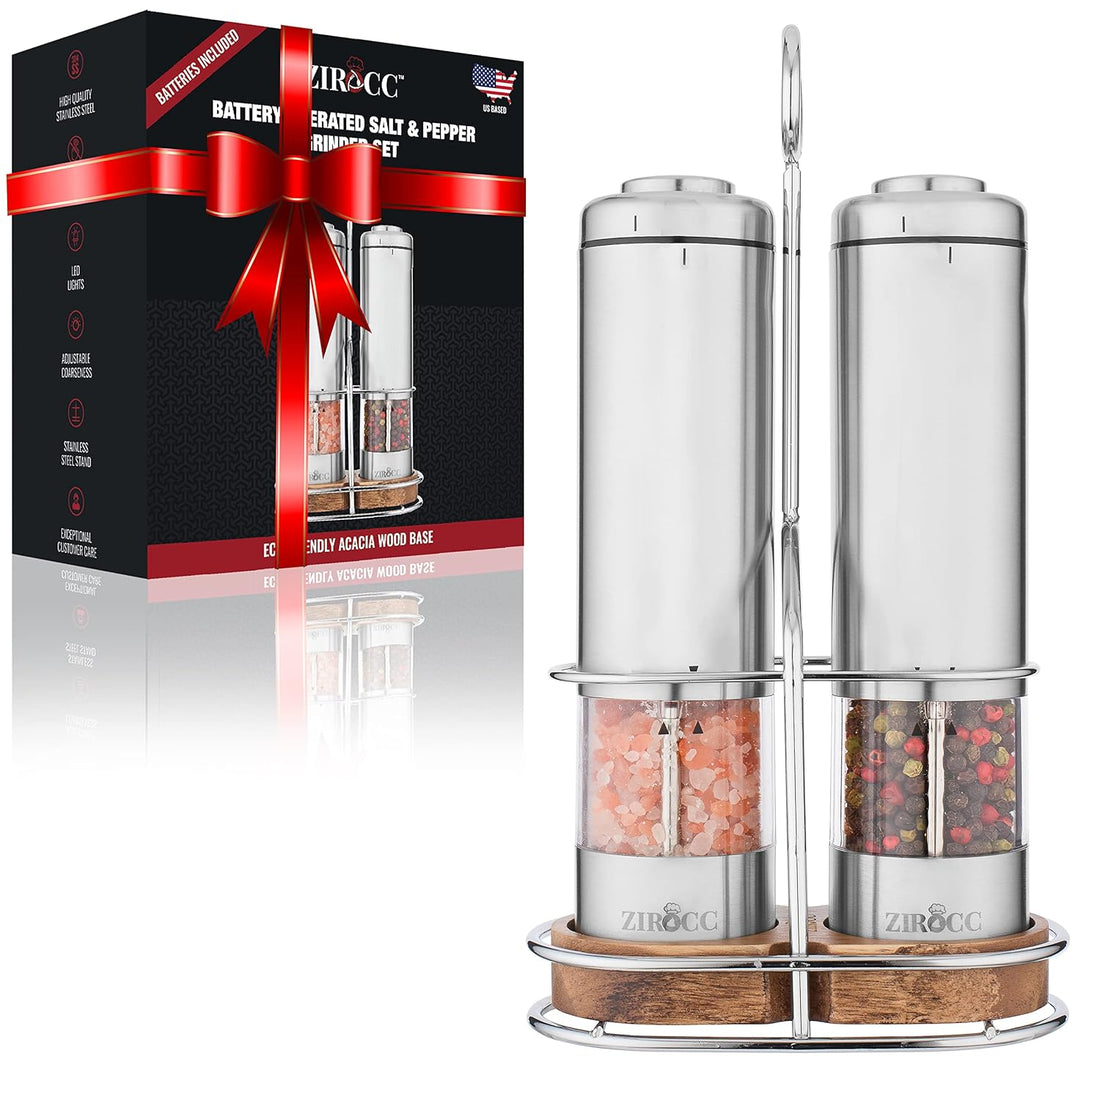 Electric Salt and Pepper Grinder Set (Batteries included)-Battery Operated Stainless Steel Salt & Pepper Mills (Pack of 2)-Adjustable Coarseness with Bright LED light-Acacia Base